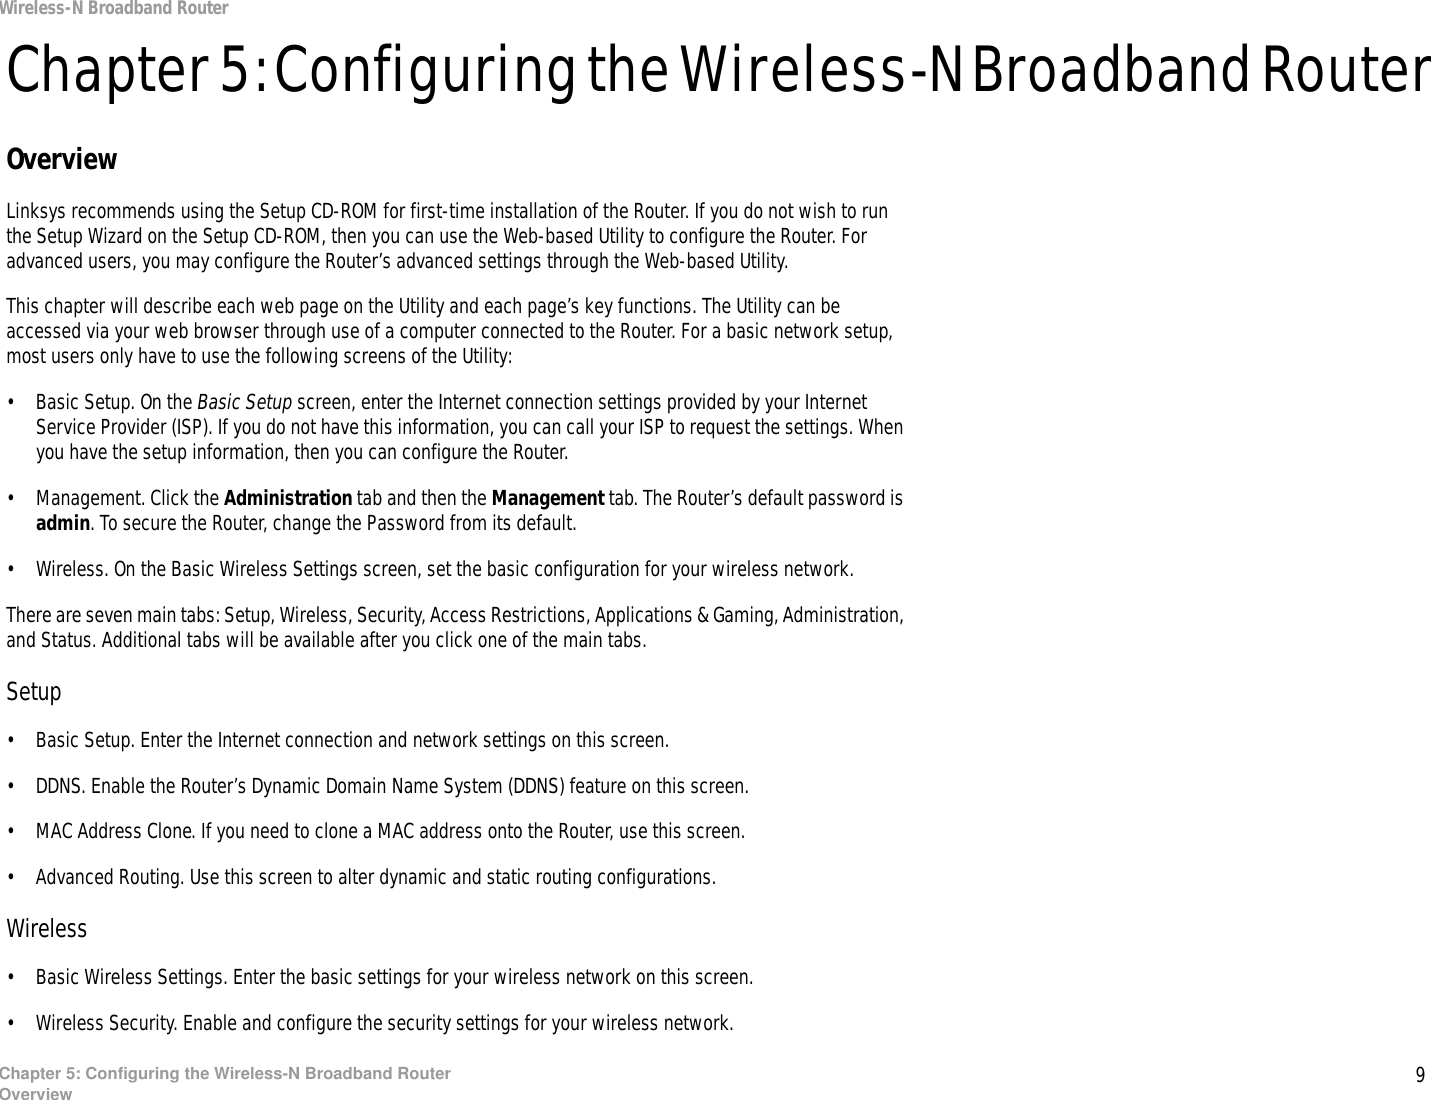 9Chapter 5: Configuring the Wireless-N Broadband RouterOverviewWireless-N Broadband RouterChapter 5: Configuring the Wireless-N Broadband RouterOverviewLinksys recommends using the Setup CD-ROM for first-time installation of the Router. If you do not wish to run the Setup Wizard on the Setup CD-ROM, then you can use the Web-based Utility to configure the Router. For advanced users, you may configure the Router’s advanced settings through the Web-based Utility.This chapter will describe each web page on the Utility and each page’s key functions. The Utility can be accessed via your web browser through use of a computer connected to the Router. For a basic network setup, most users only have to use the following screens of the Utility:• Basic Setup. On the Basic Setup screen, enter the Internet connection settings provided by your Internet Service Provider (ISP). If you do not have this information, you can call your ISP to request the settings. When you have the setup information, then you can configure the Router.• Management. Click the Administration tab and then the Management tab. The Router’s default password is admin. To secure the Router, change the Password from its default.• Wireless. On the Basic Wireless Settings screen, set the basic configuration for your wireless network.There are seven main tabs: Setup, Wireless, Security, Access Restrictions, Applications &amp; Gaming, Administration, and Status. Additional tabs will be available after you click one of the main tabs.Setup• Basic Setup. Enter the Internet connection and network settings on this screen.• DDNS. Enable the Router’s Dynamic Domain Name System (DDNS) feature on this screen.• MAC Address Clone. If you need to clone a MAC address onto the Router, use this screen.• Advanced Routing. Use this screen to alter dynamic and static routing configurations.Wireless• Basic Wireless Settings. Enter the basic settings for your wireless network on this screen.• Wireless Security. Enable and configure the security settings for your wireless network.